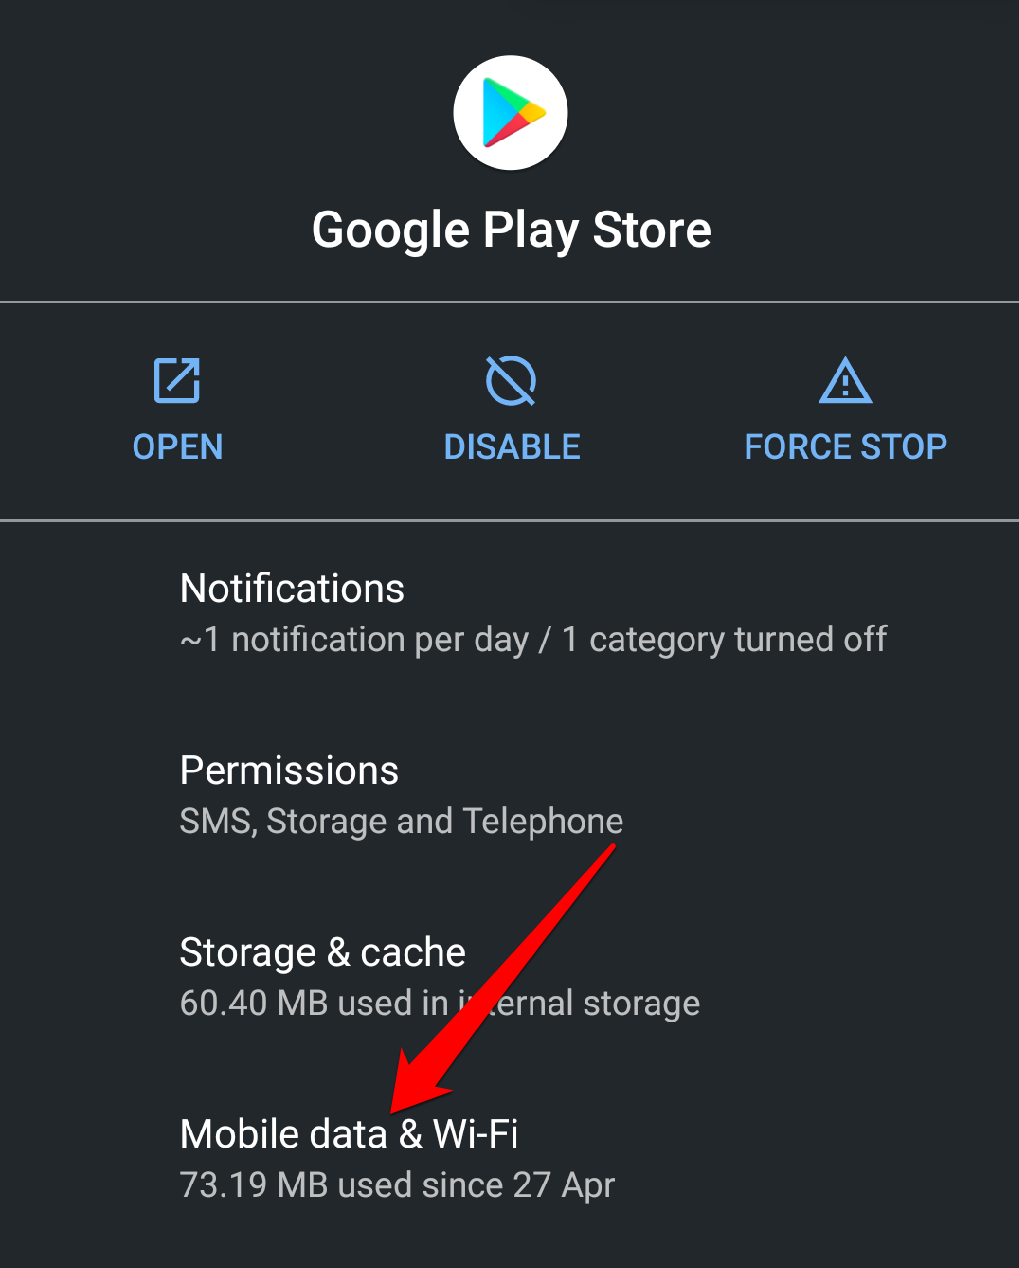 google play games app don't work properly on my redmi A7 device